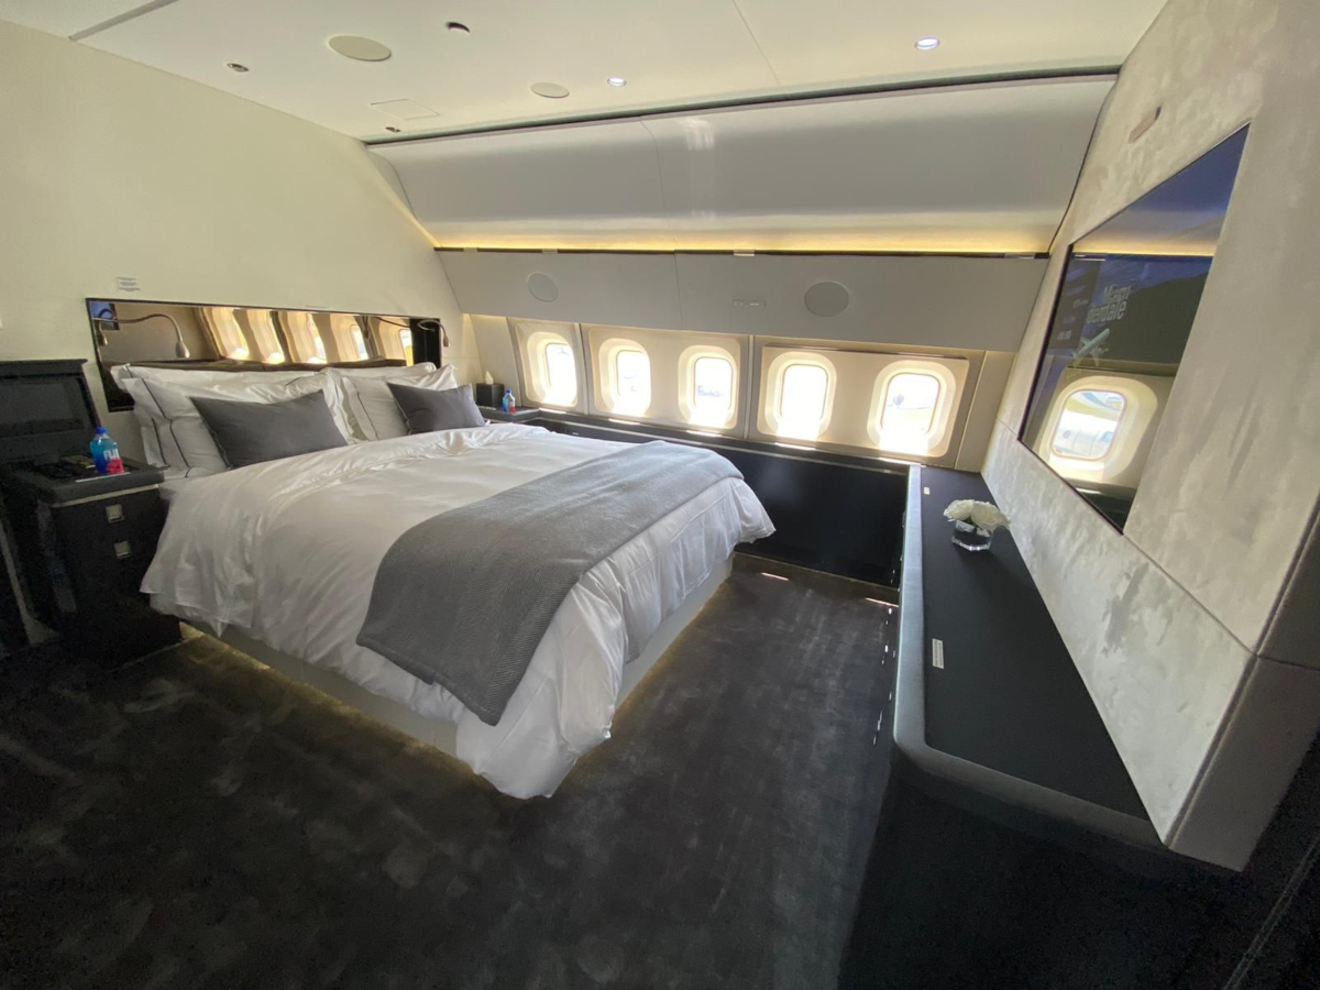 A queen-size bed in the plane's master bedroom